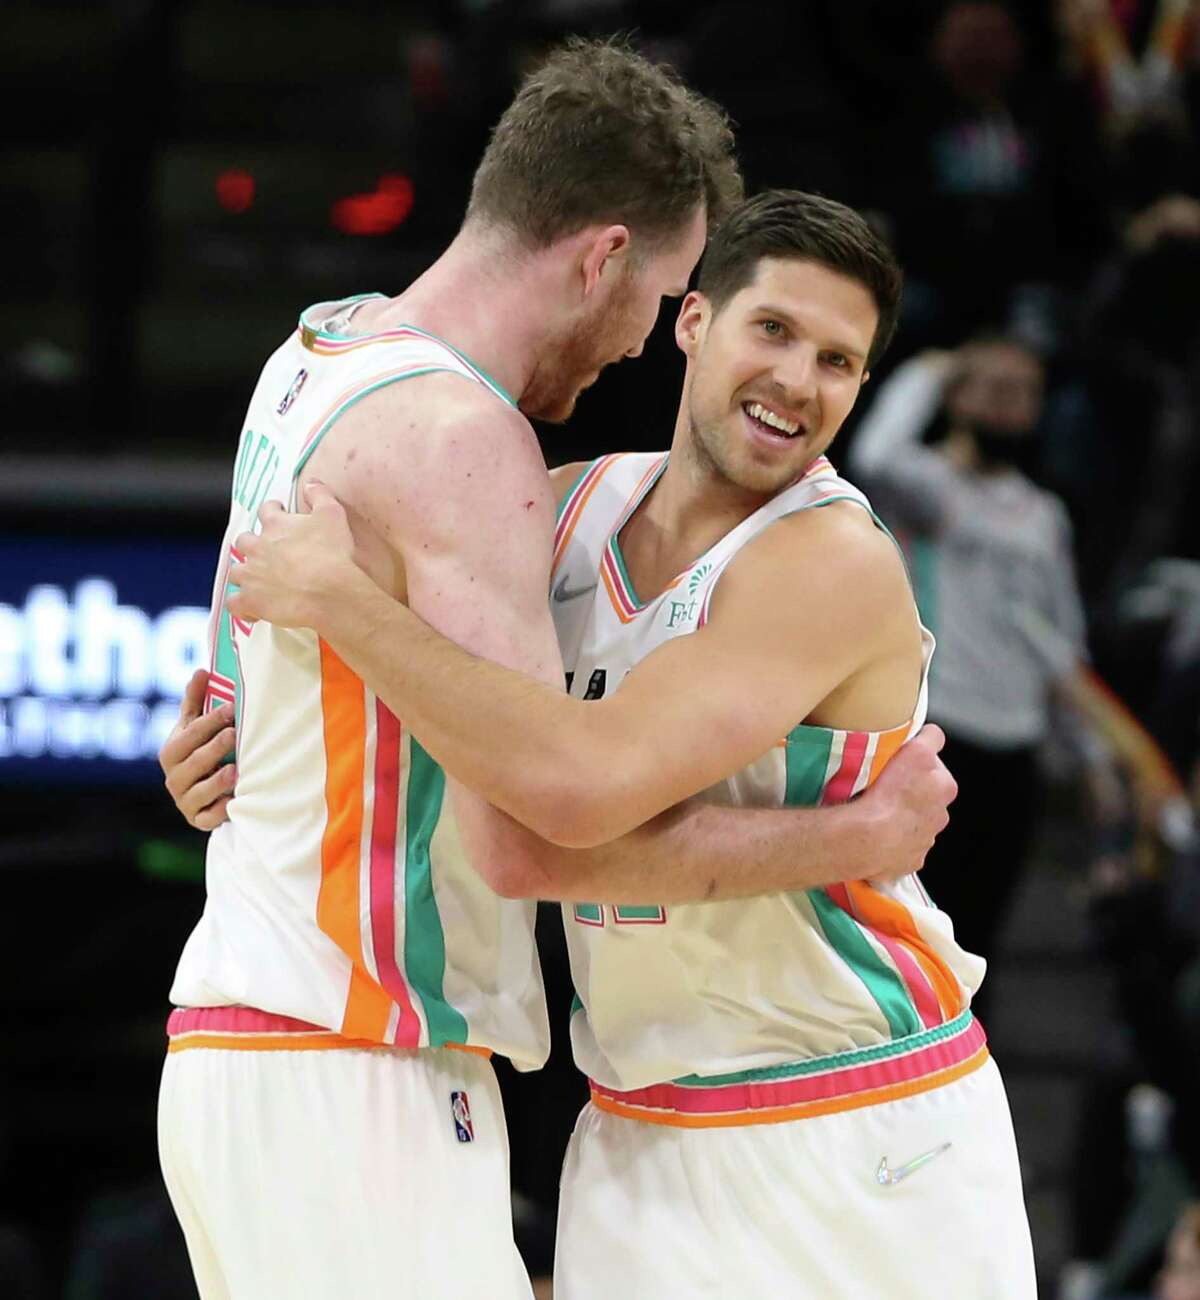 Spurs' Doug McDermott (17) gives a hug to teammate Jakob Poeltl (25) after scoring a three against the Houston Rockets in the second half at the AT&T Center on Friday, Feb. 4, 2022. Spurs defeated the Rockets, 131-106.